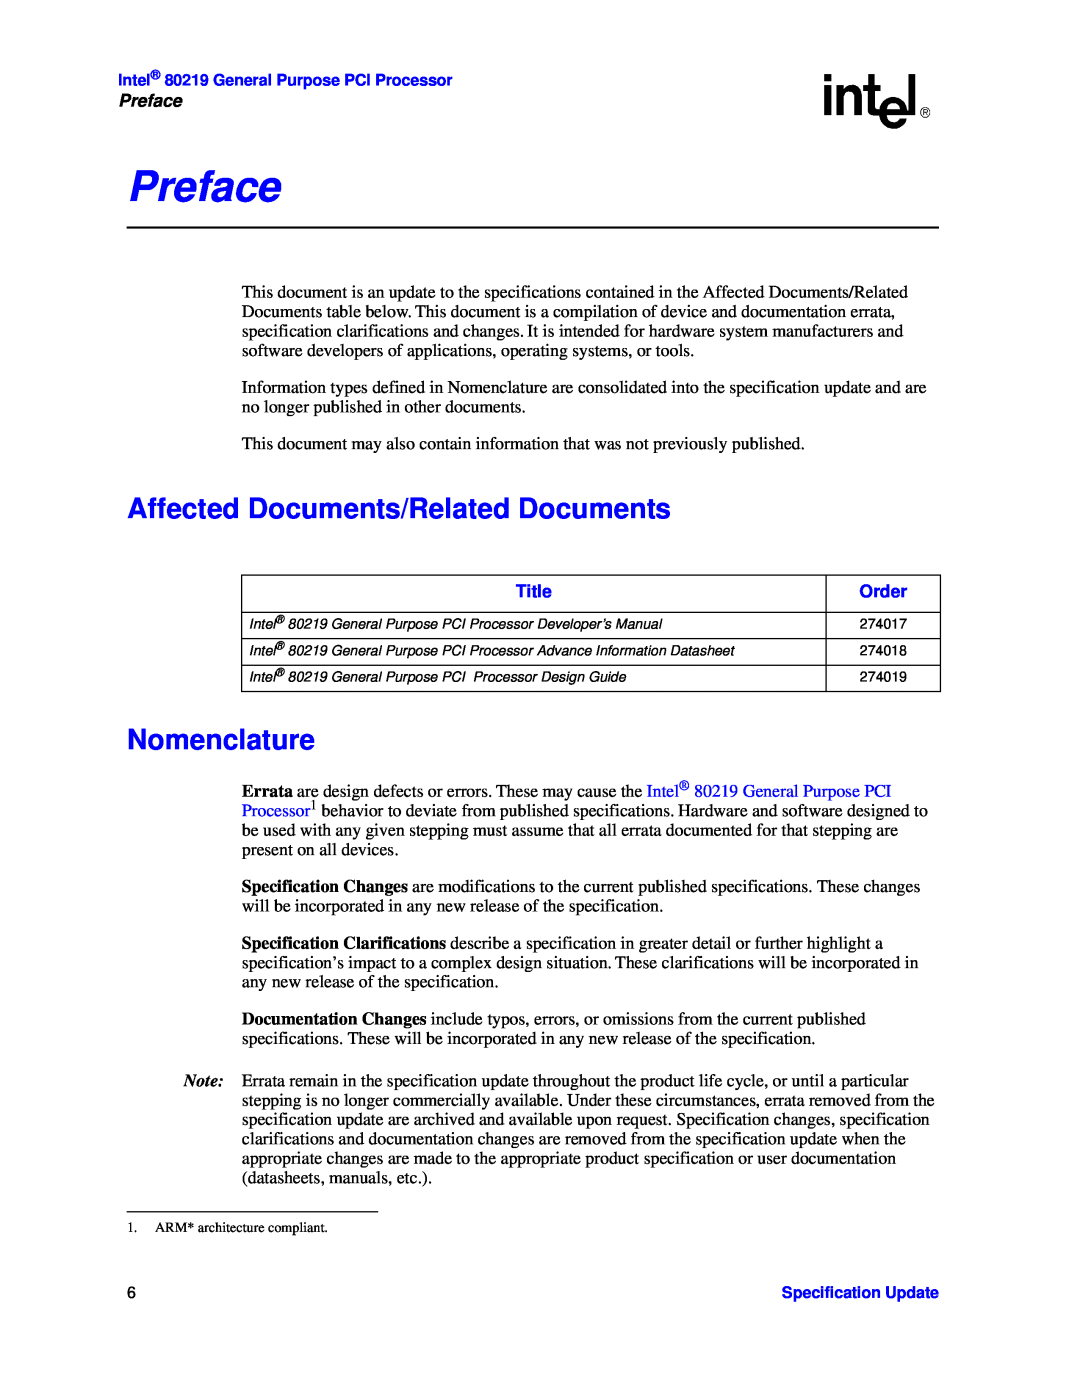 Intel 80219 specifications Preface, Affected Documents/Related Documents, Nomenclature, Title, Order 